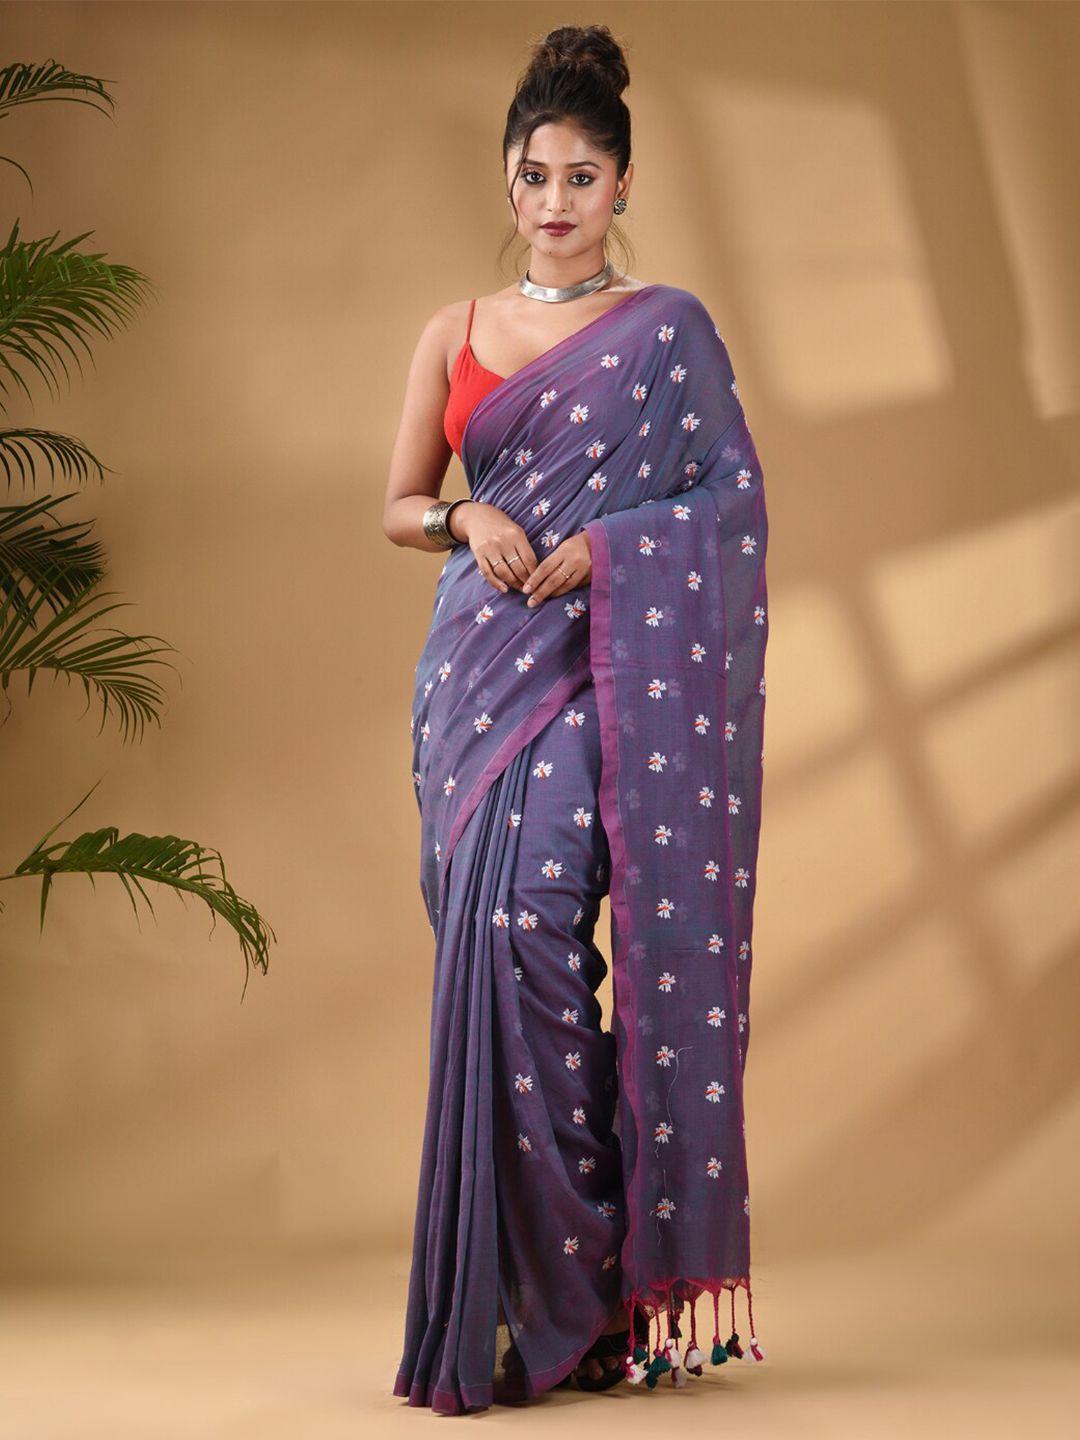 arhi floral embroidered pure cotton saree